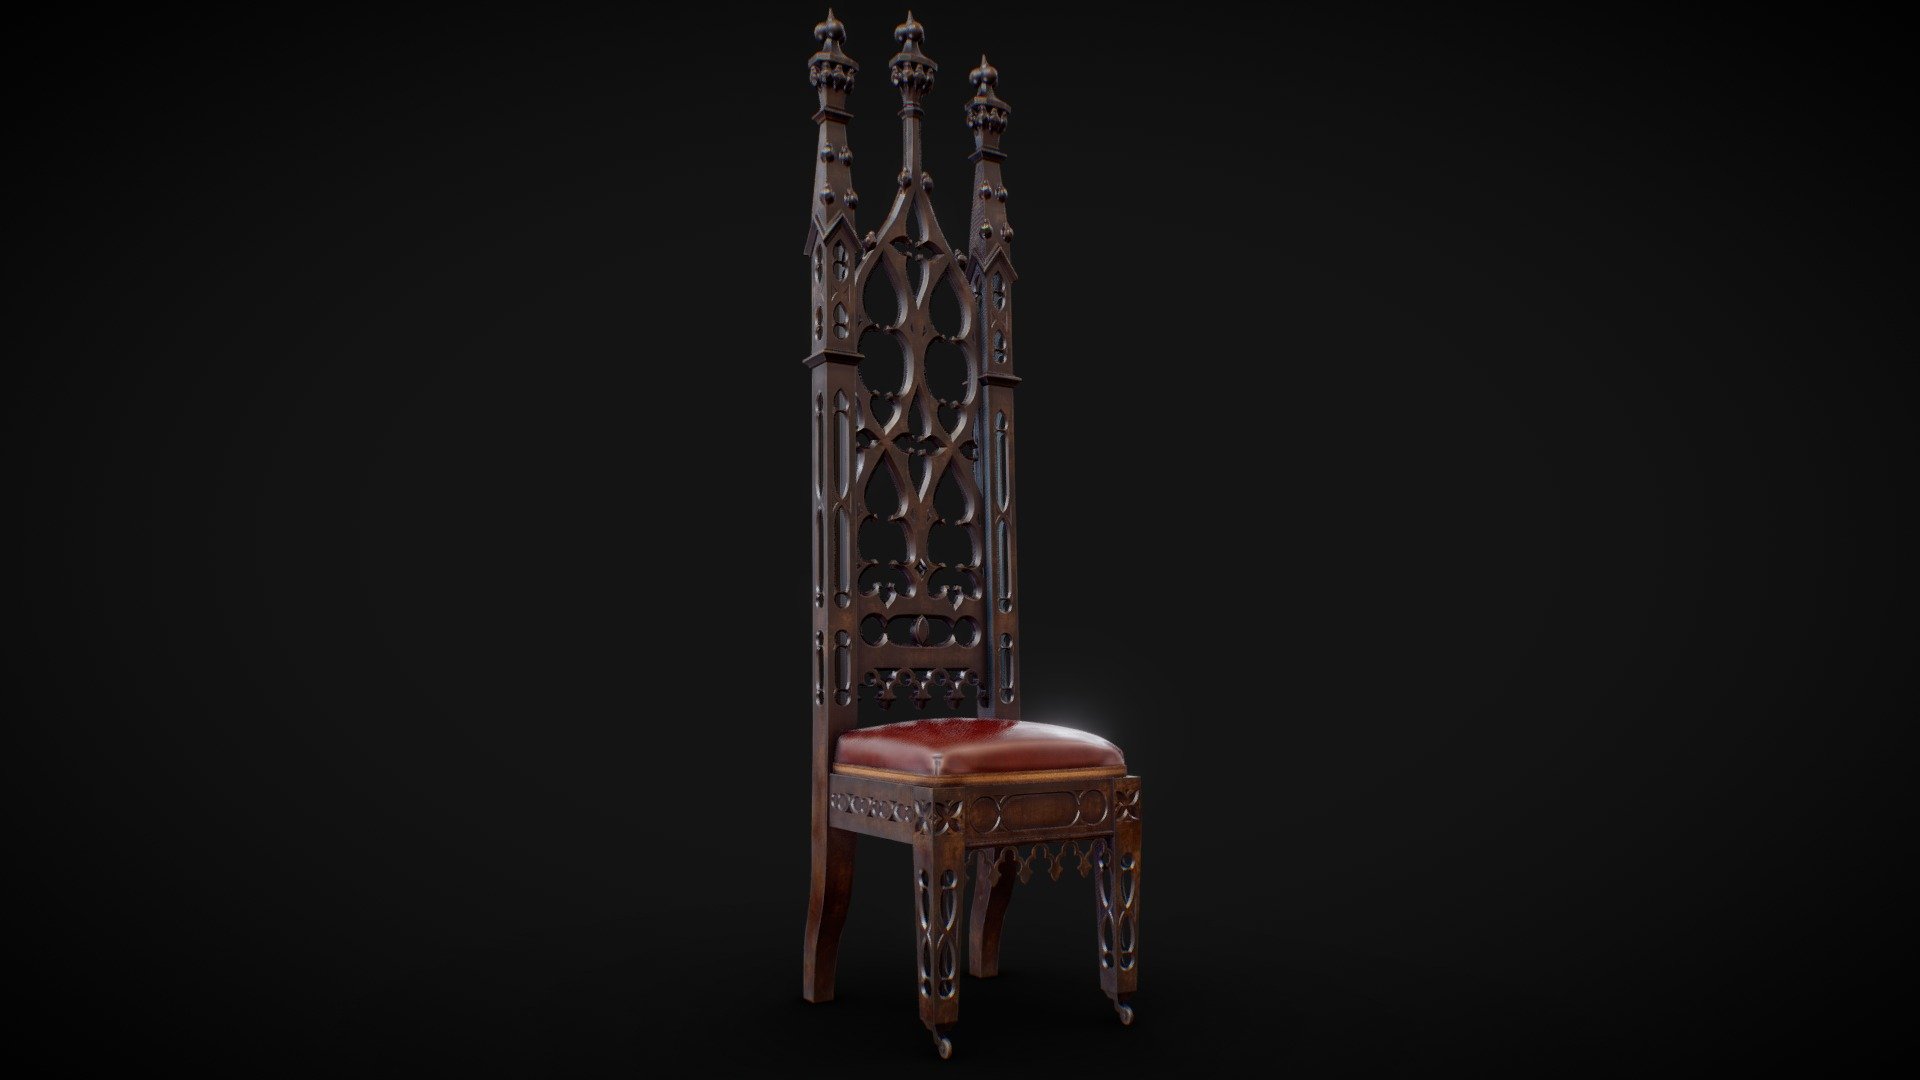 Ladies and Gentlemen, do You like Gothic estetique?
Gothic Revival Hall Chair 1845-1855  low poly model. 
(Blender/Marmoset Toolbag/Substance Painter) 
Courtesy of Winterthur Museum, Hall chair, 1845-1855, Oak, Paint. 
&ldquo;..Museum purchase with funds provided by the Henry Francis du Pont Collectors Circle and partial gift of Milly McGehee, 1997.35. In the home of Edward and Lucy Butts of Vicksburg, Mississippi, this chair made an imposing impression. The play of candlelight across its dark carvings would have cast bold shadows, enhancing the visual drama. Ornate ornament made it clear that the chair had been a costly investment, especially when displayed as a set. To the modern eye, and perhaps to the Butts family’s visitors, the chair seems more at home in a European cathedral than in a Vicksburg mansion.